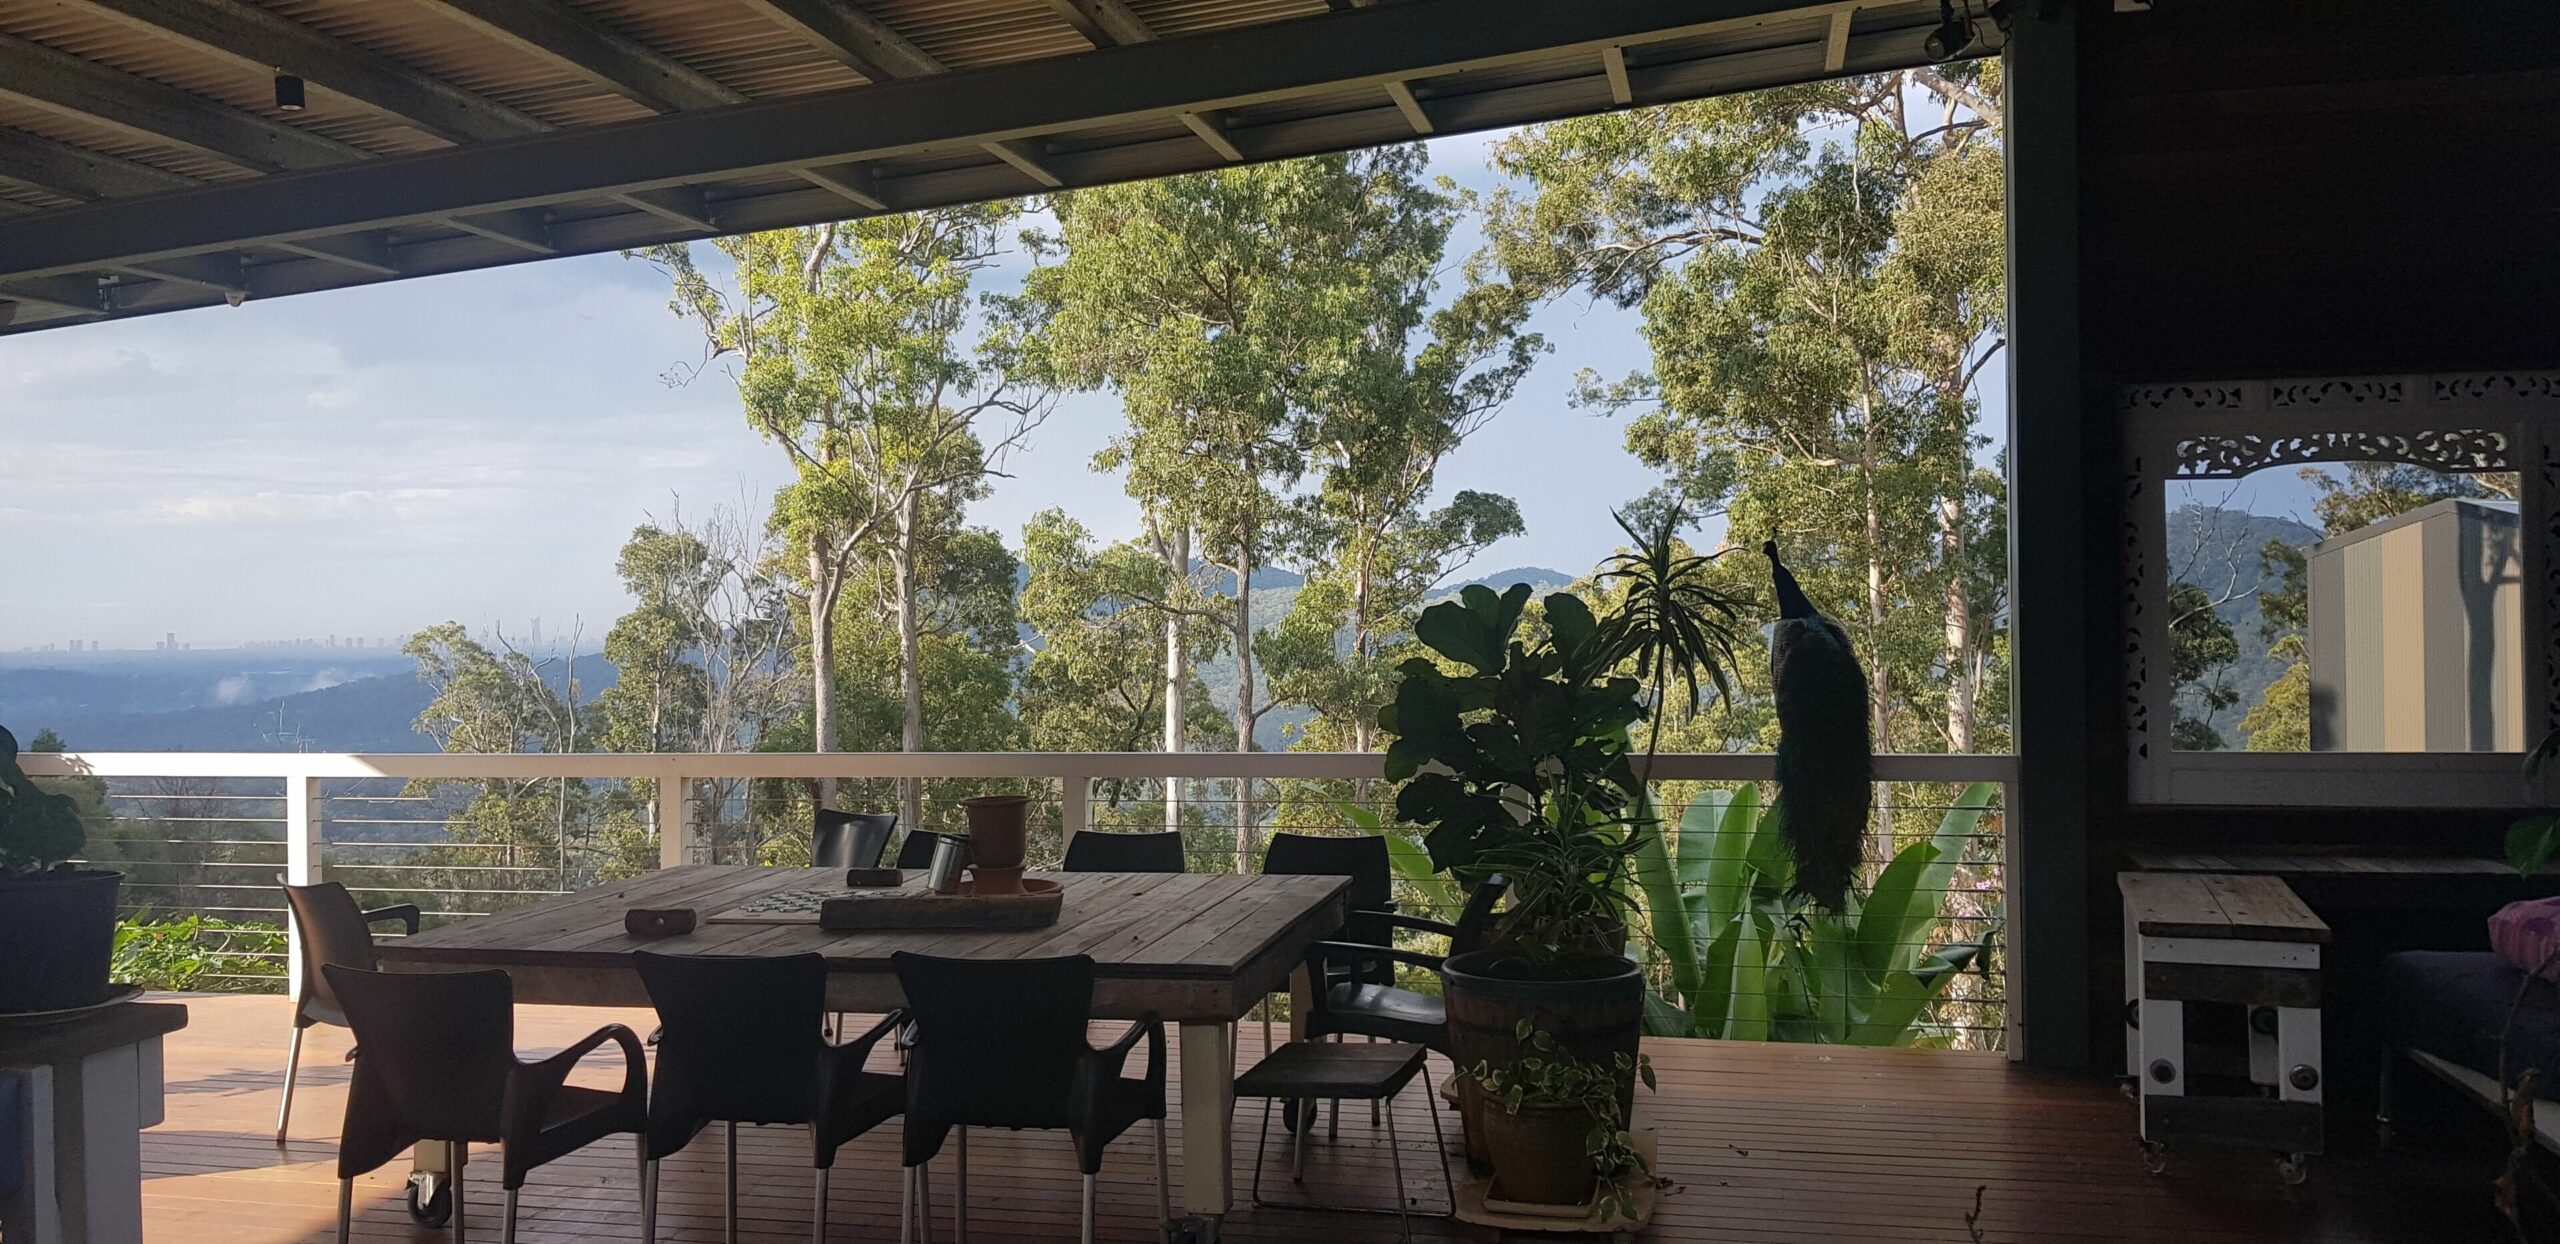 The Shed Conversion With Hot tub With Amazing Views@ Gold Coast Tree Houses